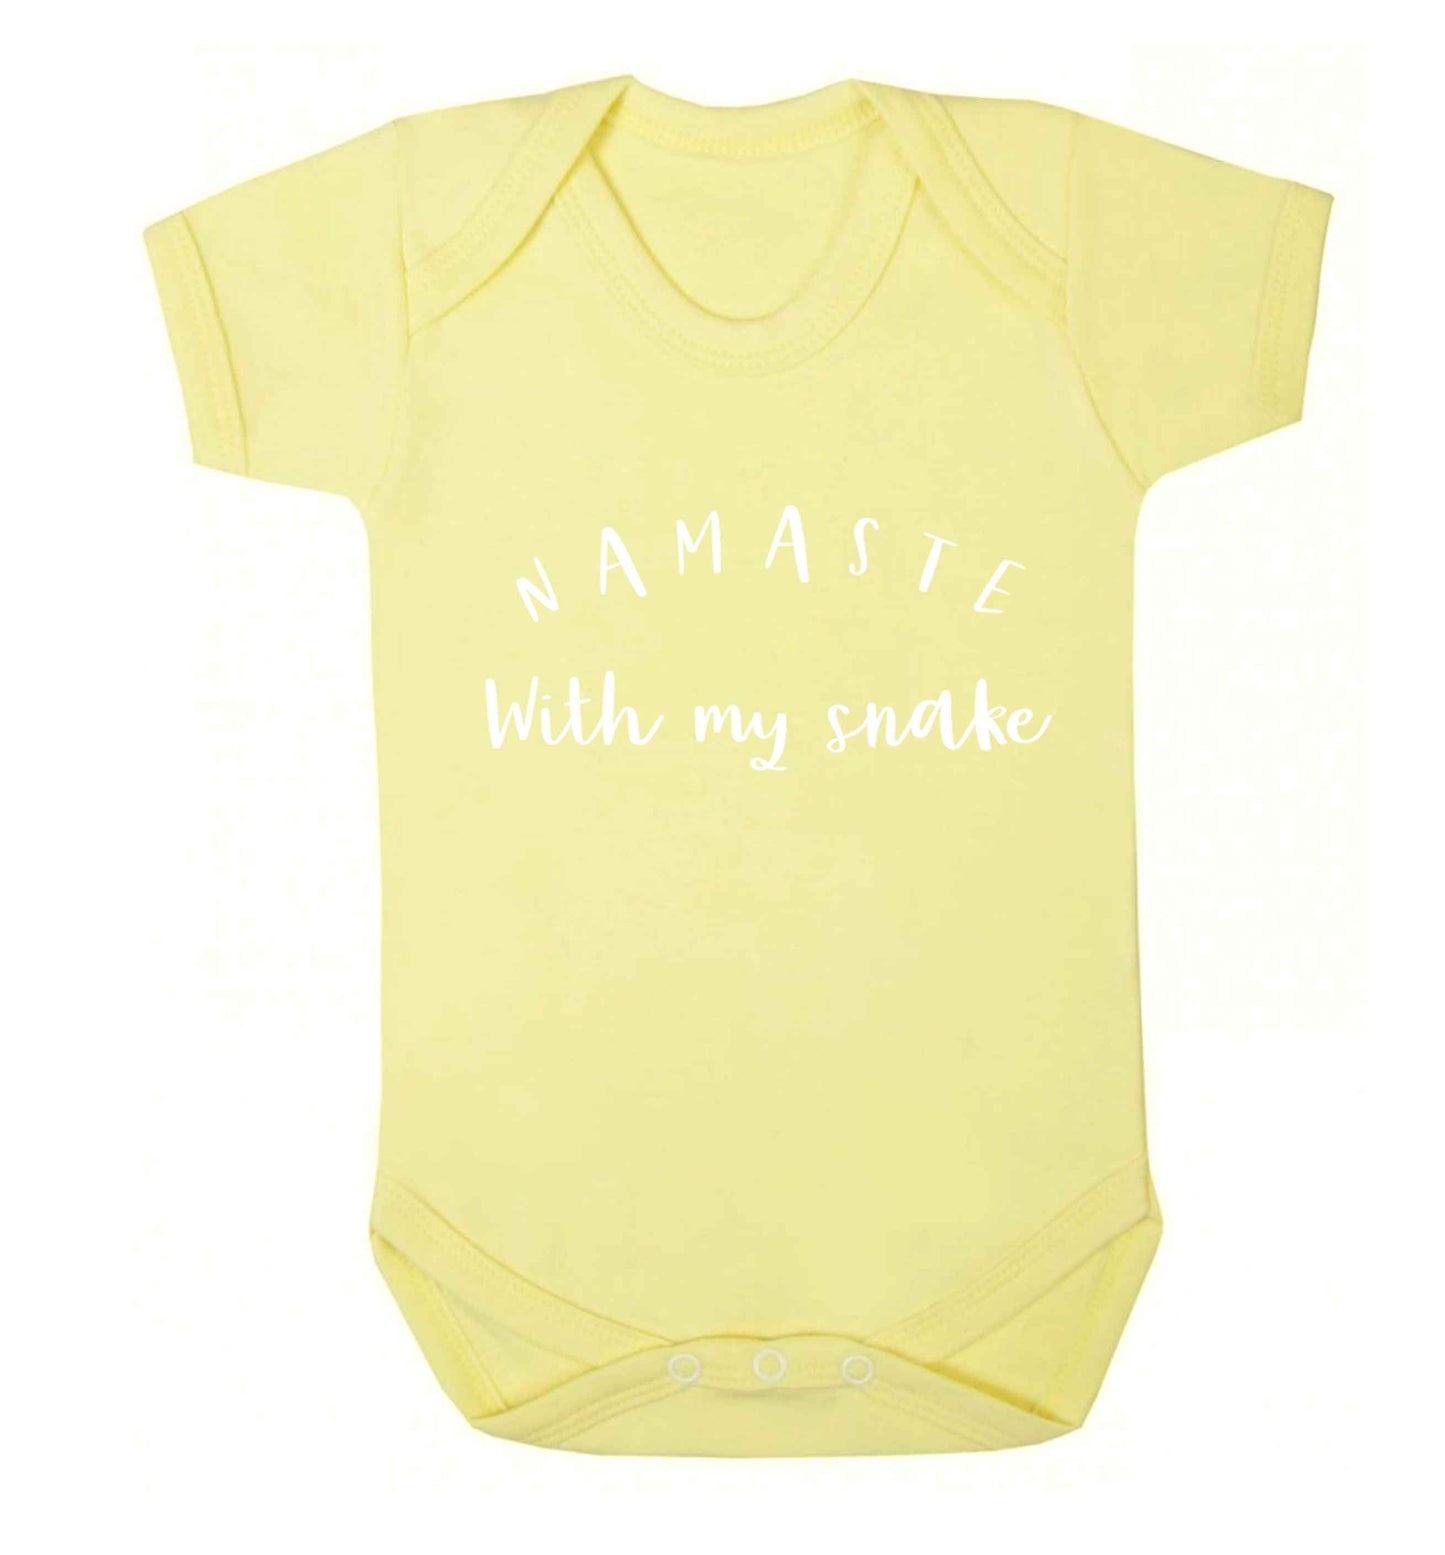 Namaste with my snake Baby Vest pale yellow 18-24 months